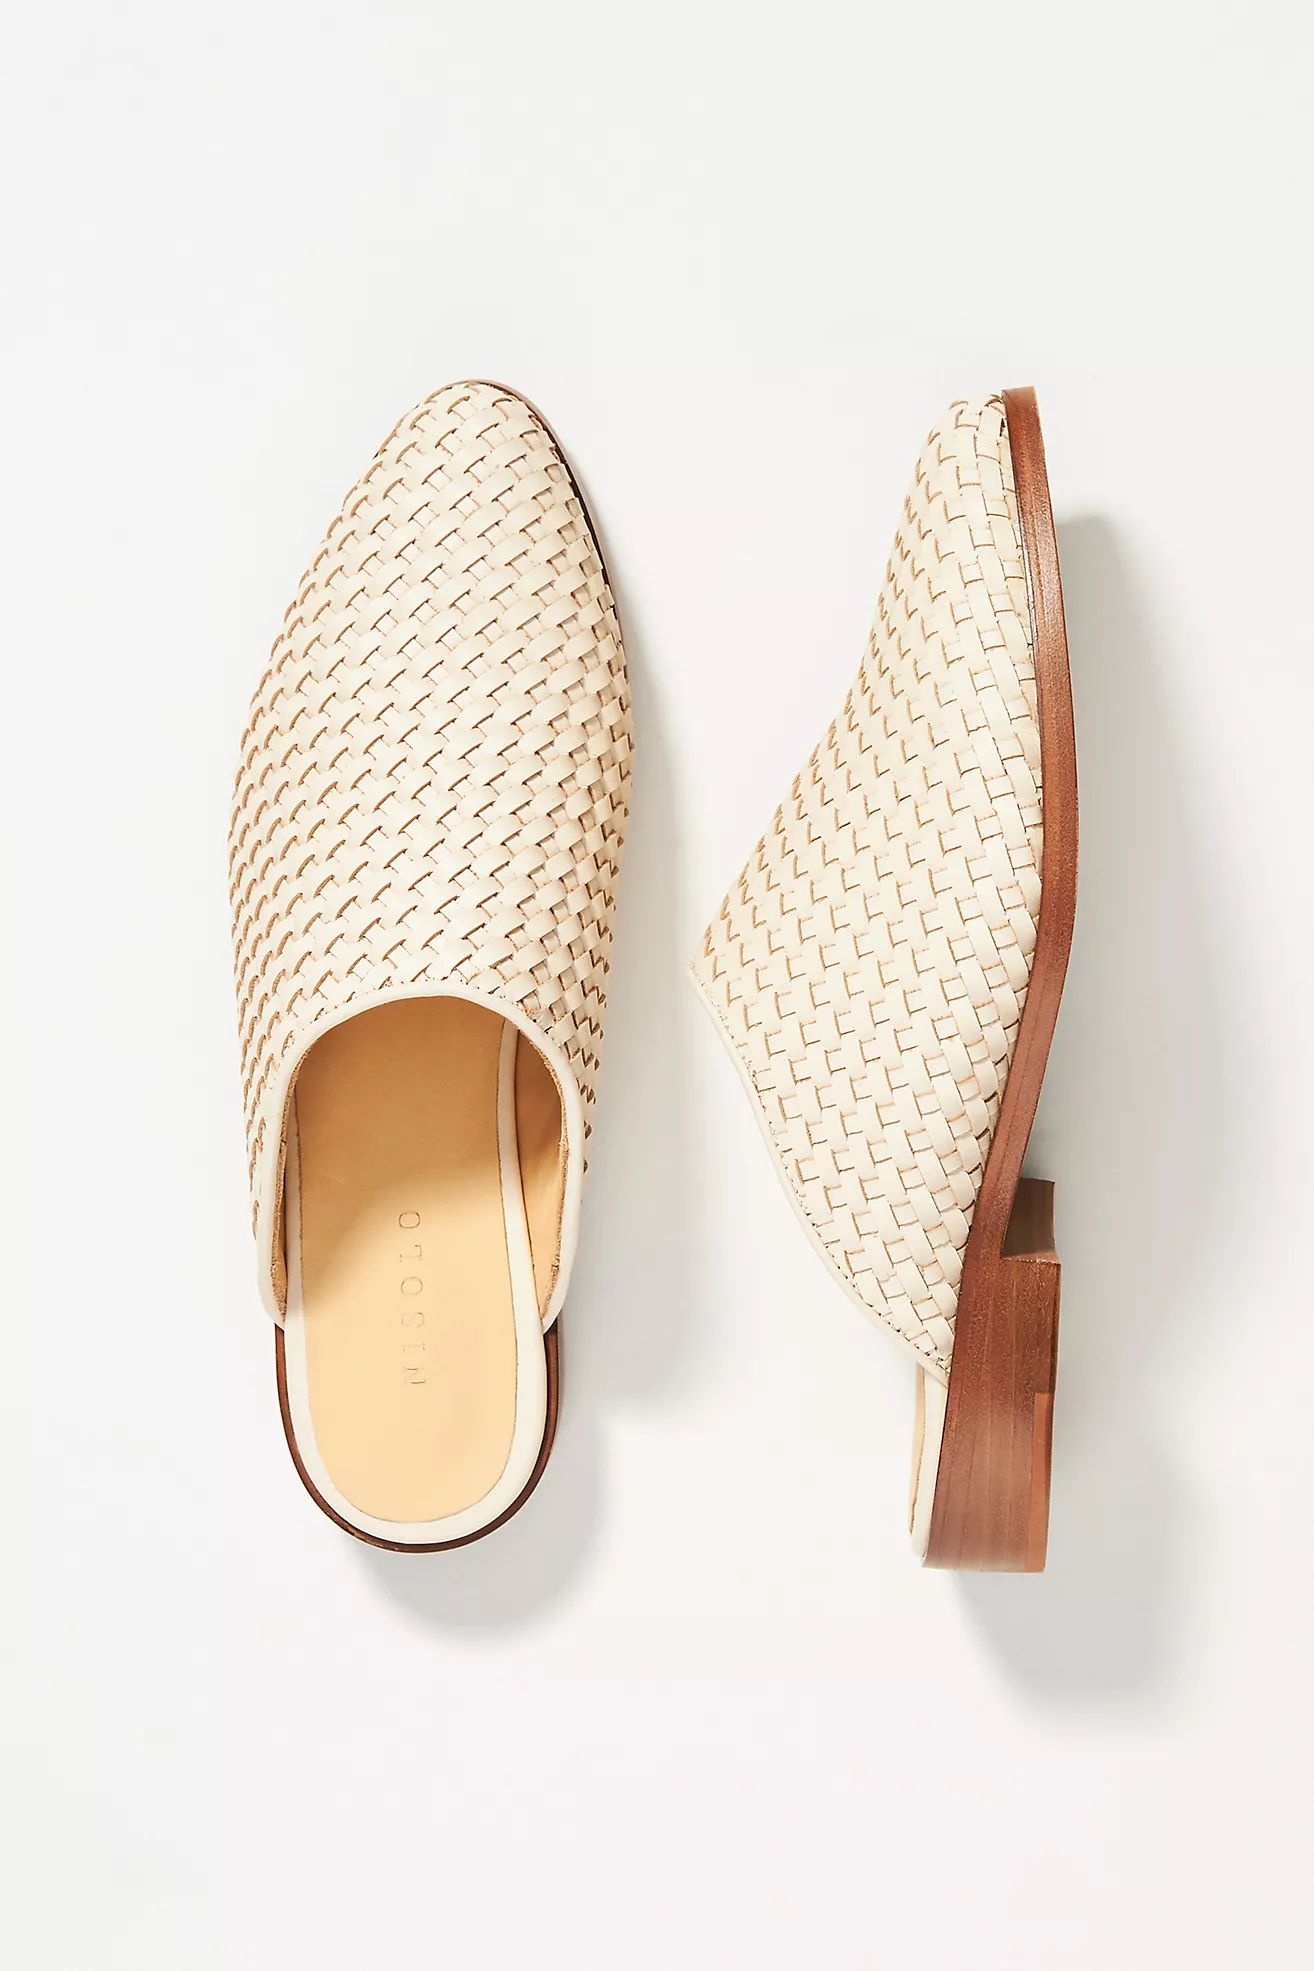 Nisolo Ama Woven Mules | Anthropologie (US)